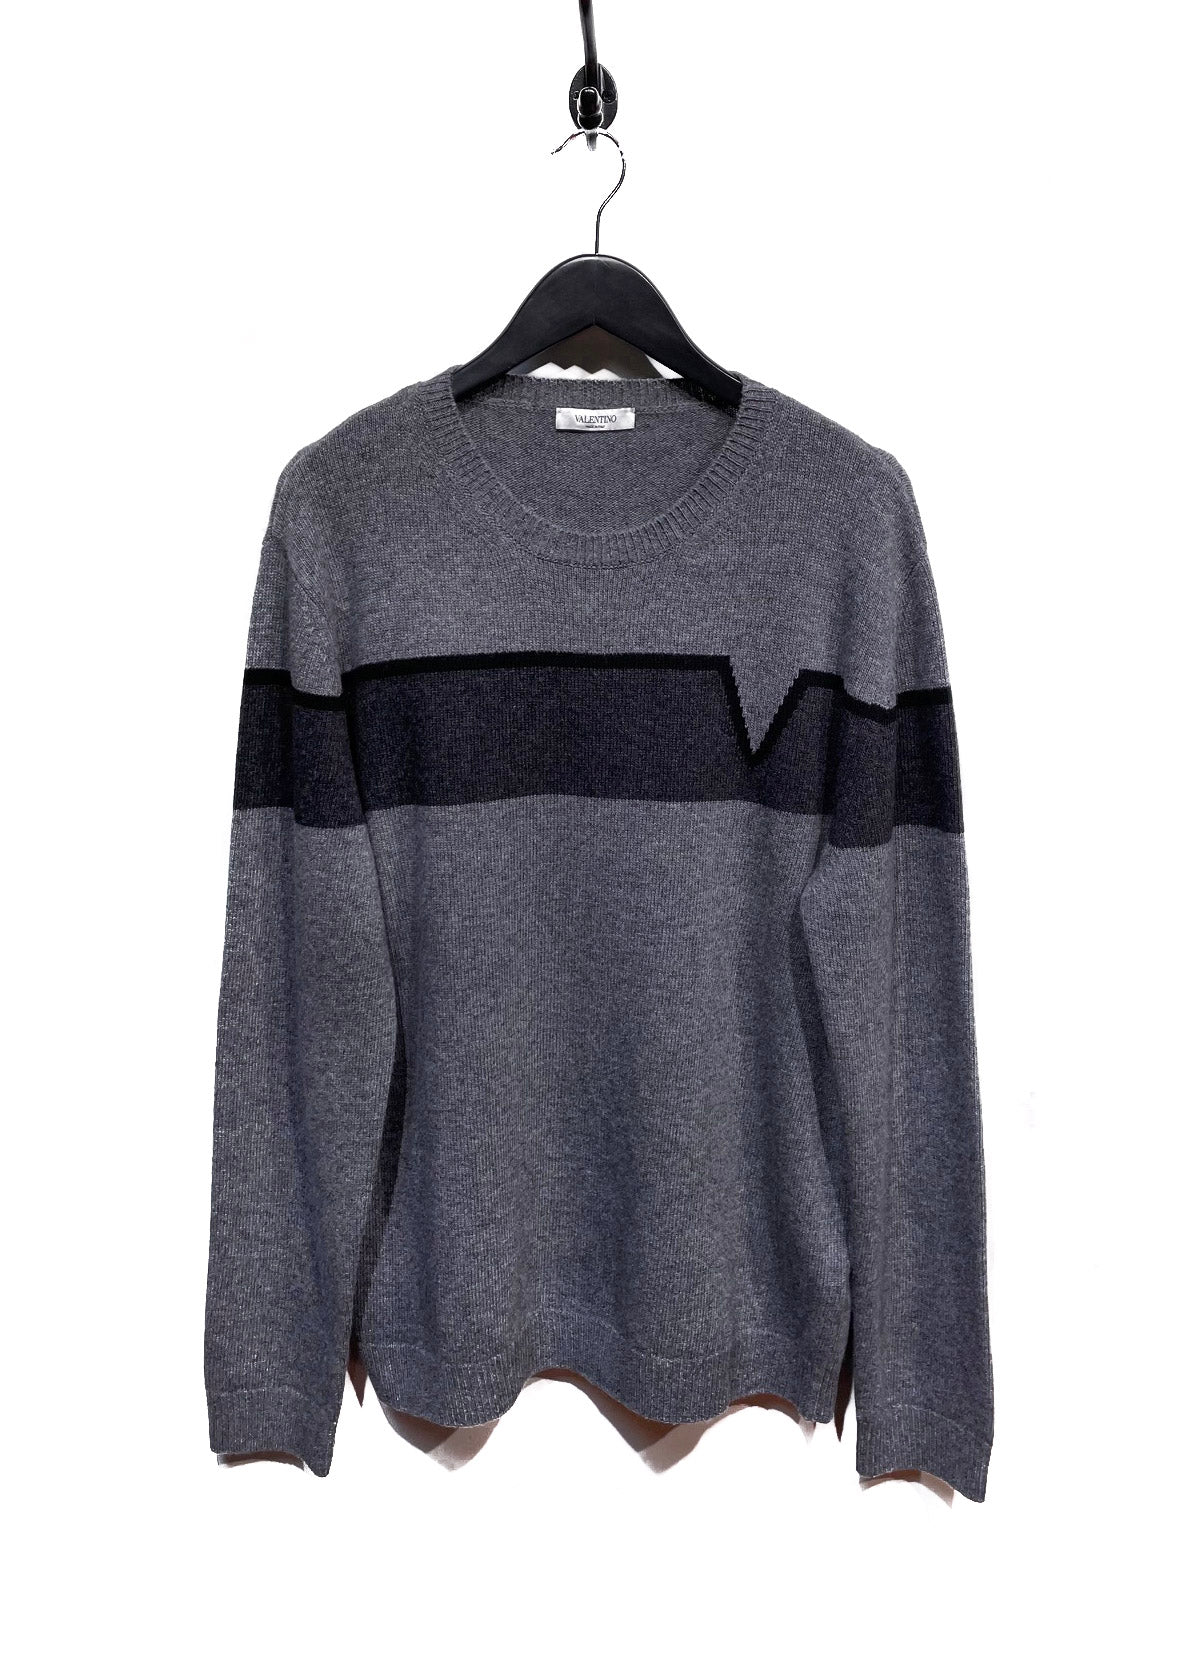 Illusion orm Link Valentino Grey Wool Cashmere V Band Intersia Sweater – Boutique LUC.S